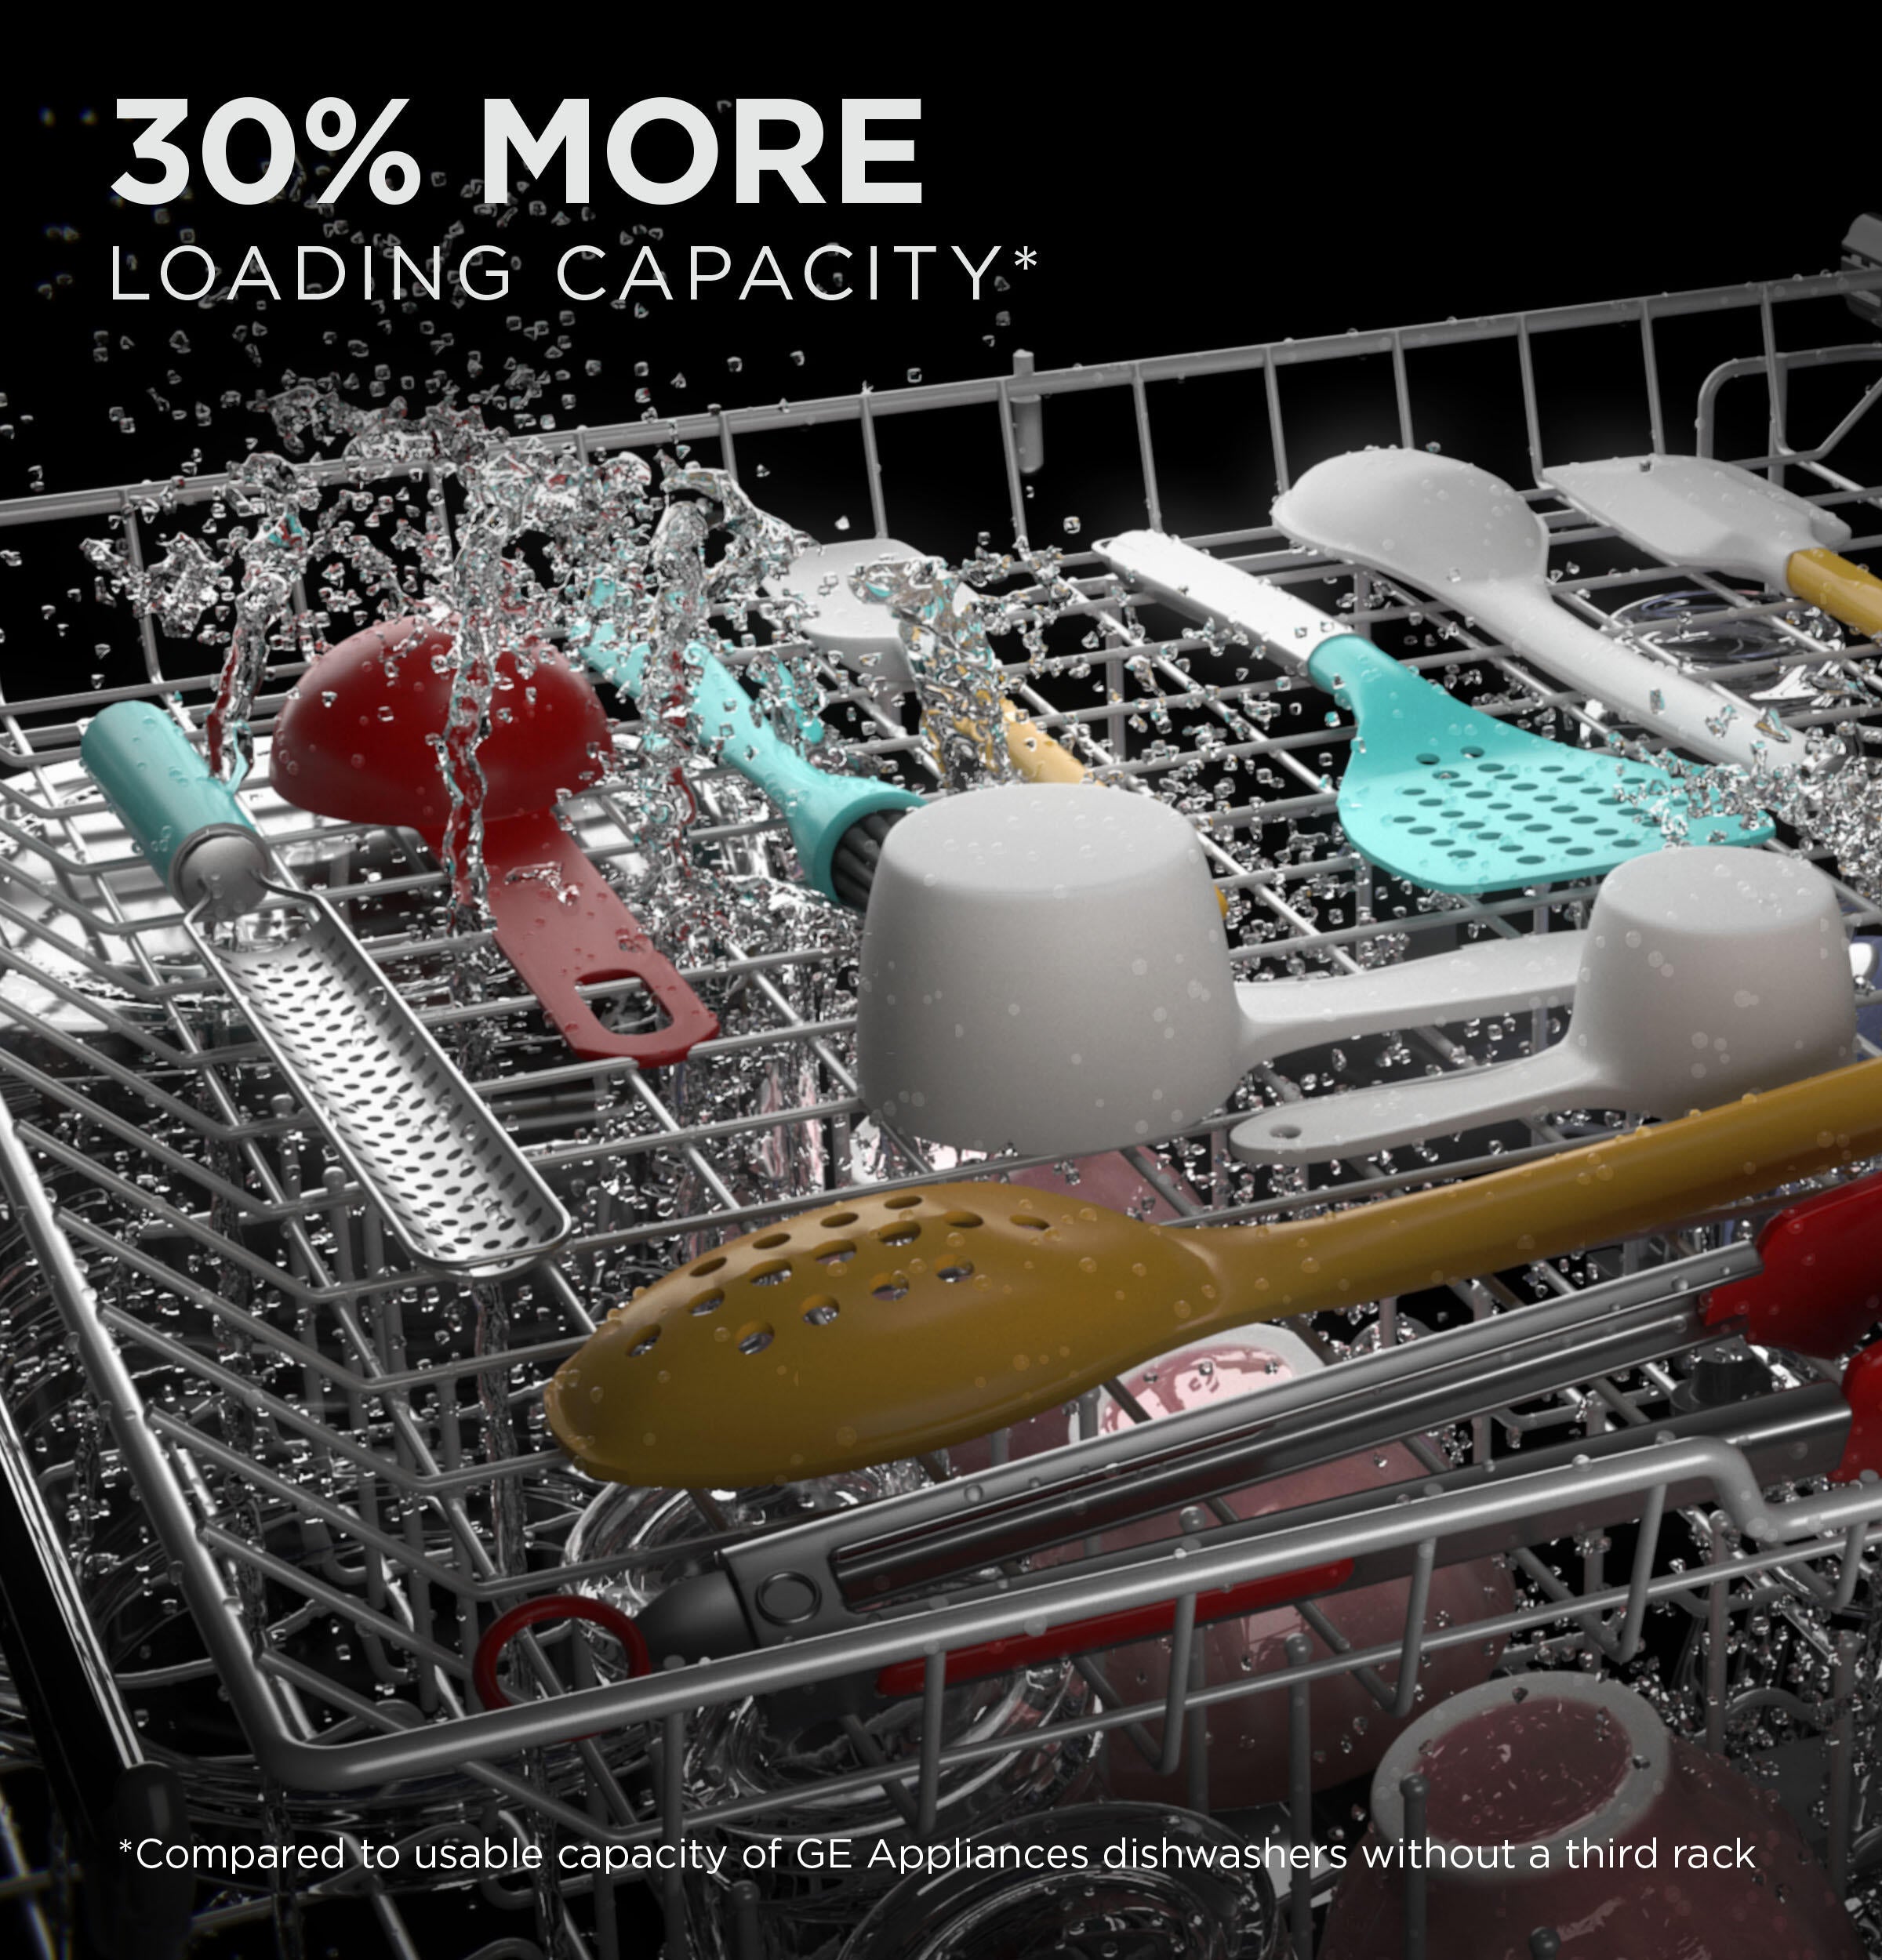 How to Clean a GE Dishwasher and Eliminate Odors